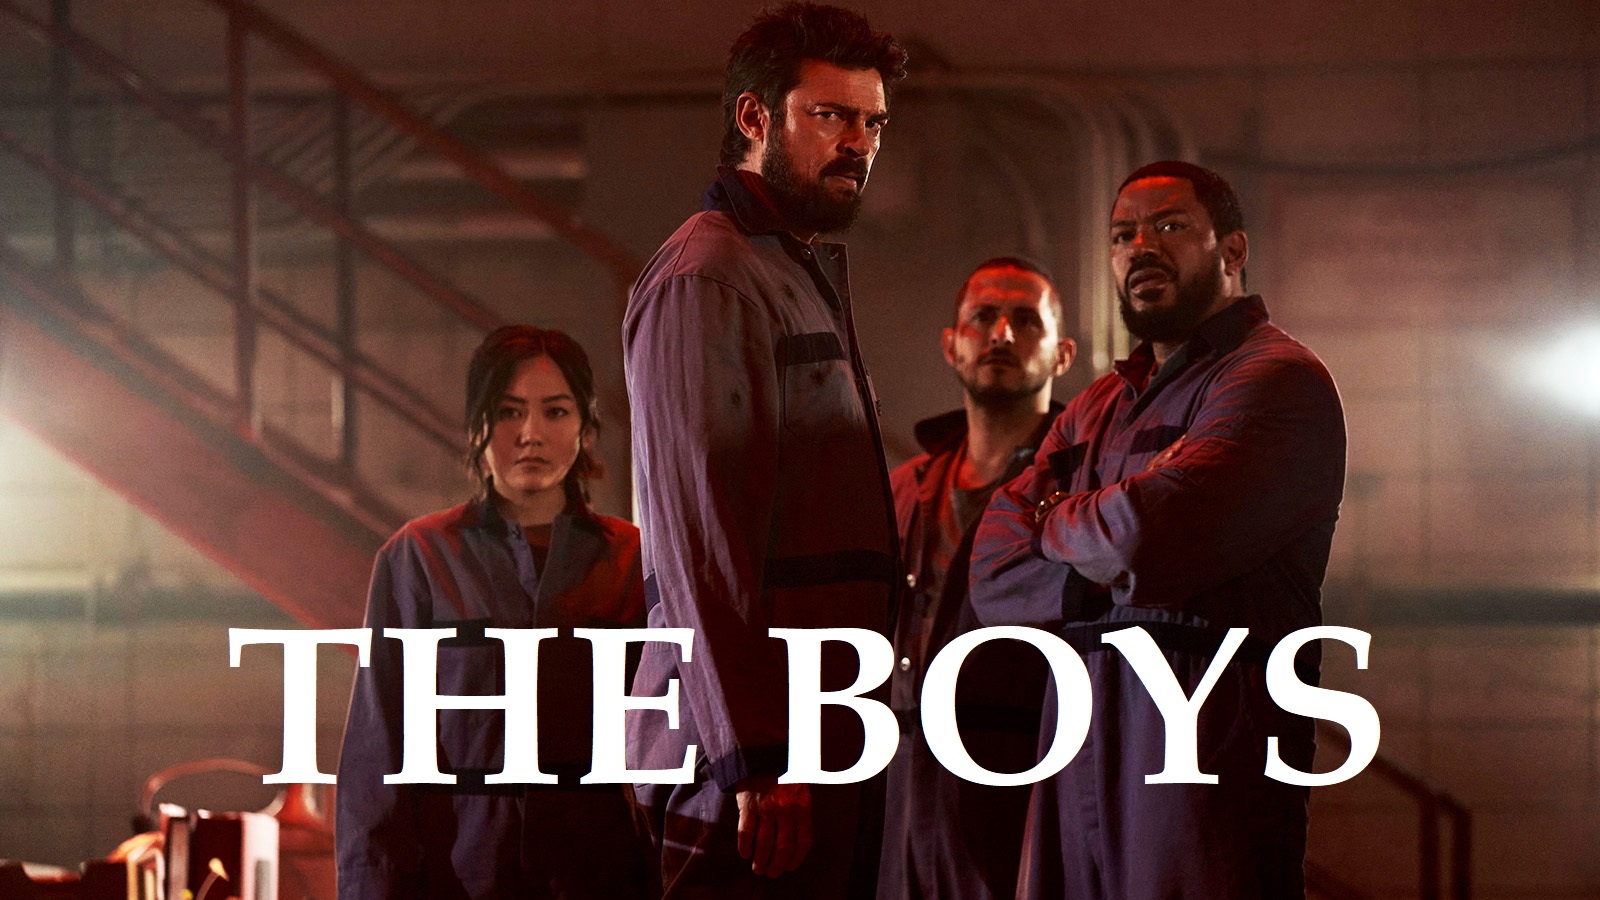 The Boys Season 3 Is already Released | What is awesome All Episodes,The Boys Web Series in 2022,The Boys 2022,The Boys Season 3 Overview,Movies/ Web Series,The Boys Season 3 Review,, The Boys Season 3 2022